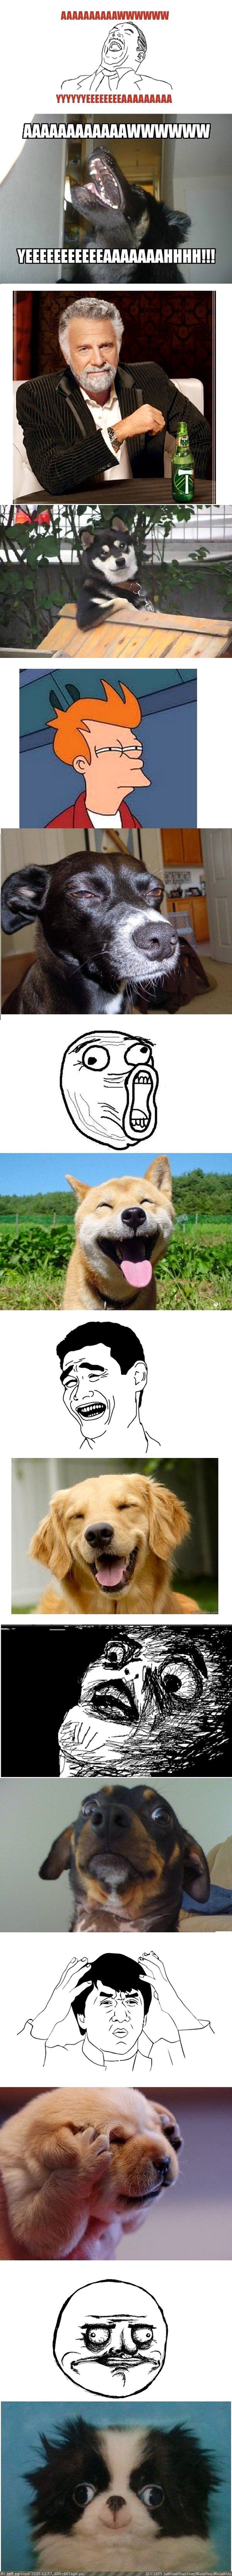 Internet Memes as Dog Photos (funny real-life dogs) (in Rehost)